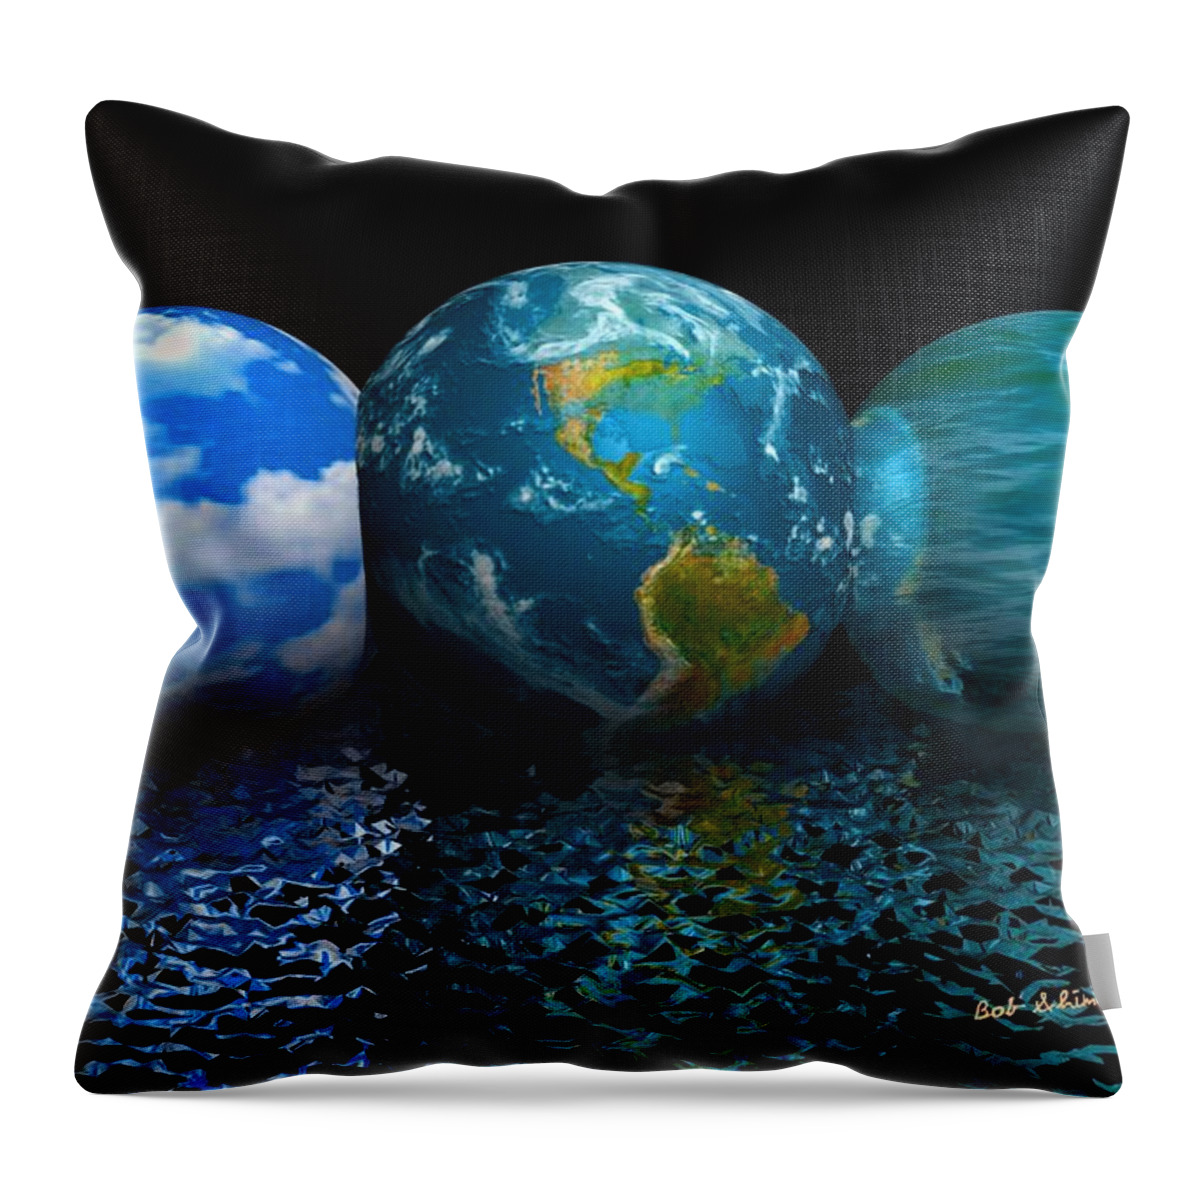 Digital Abstract Throw Pillow featuring the digital art Sky, Earth, Sky by Bob Shimer